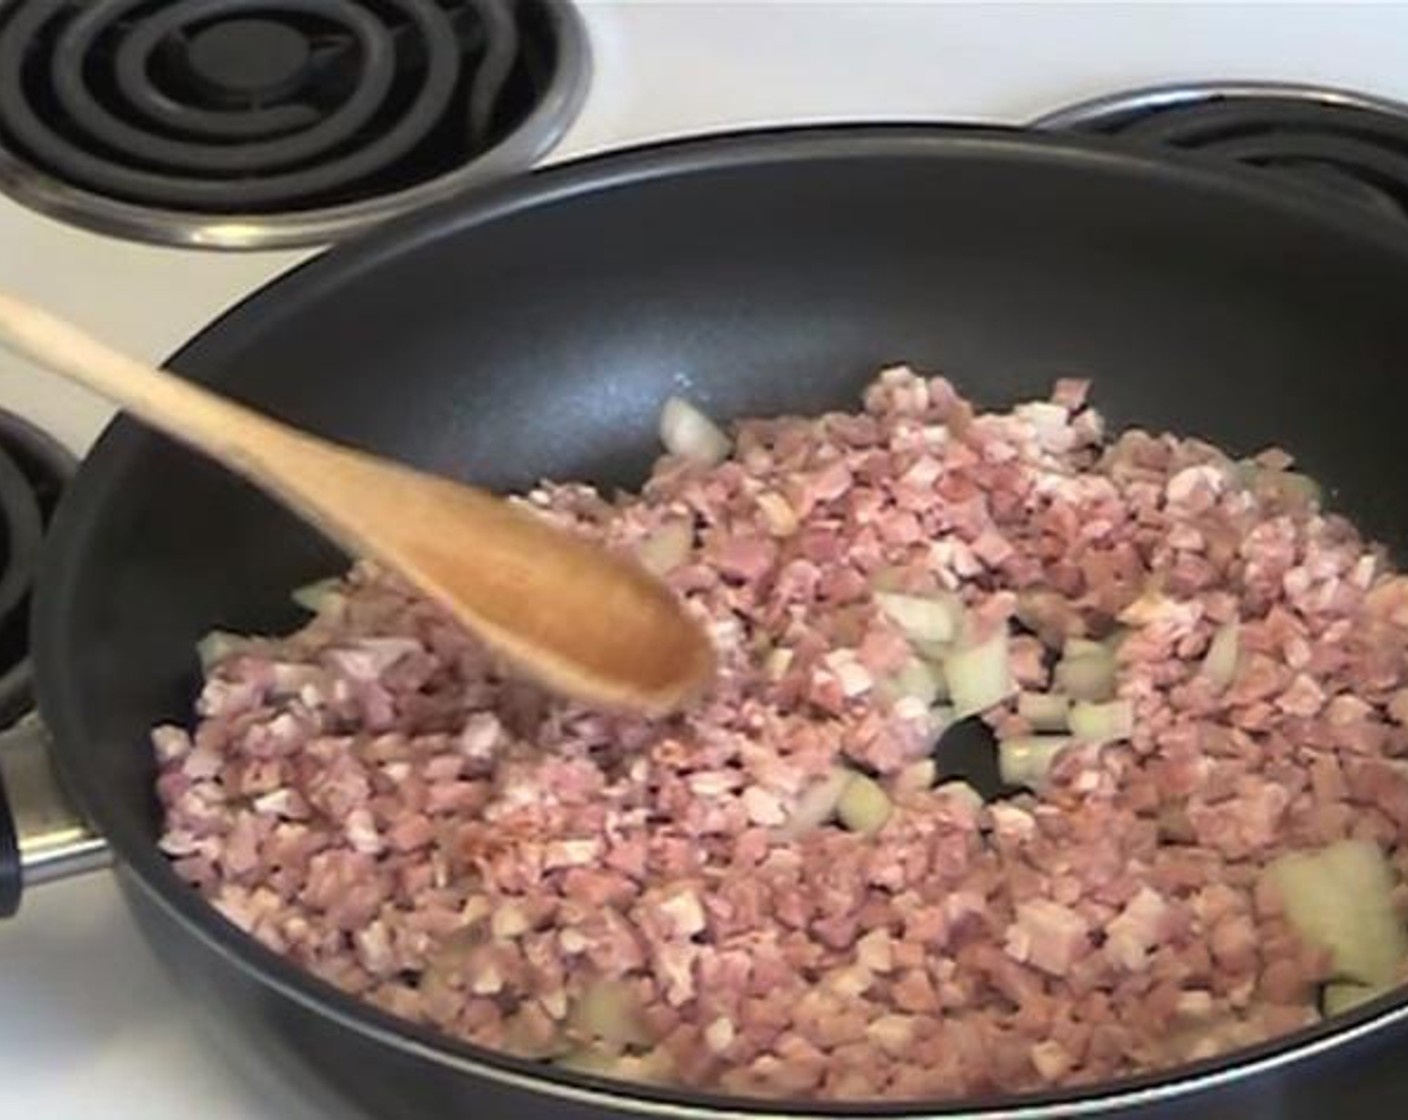 step 2 Inside a greased pan, fry together the Yellow Onion (1), and Diced Bacon (1.1 lb) for about 3 minutes.